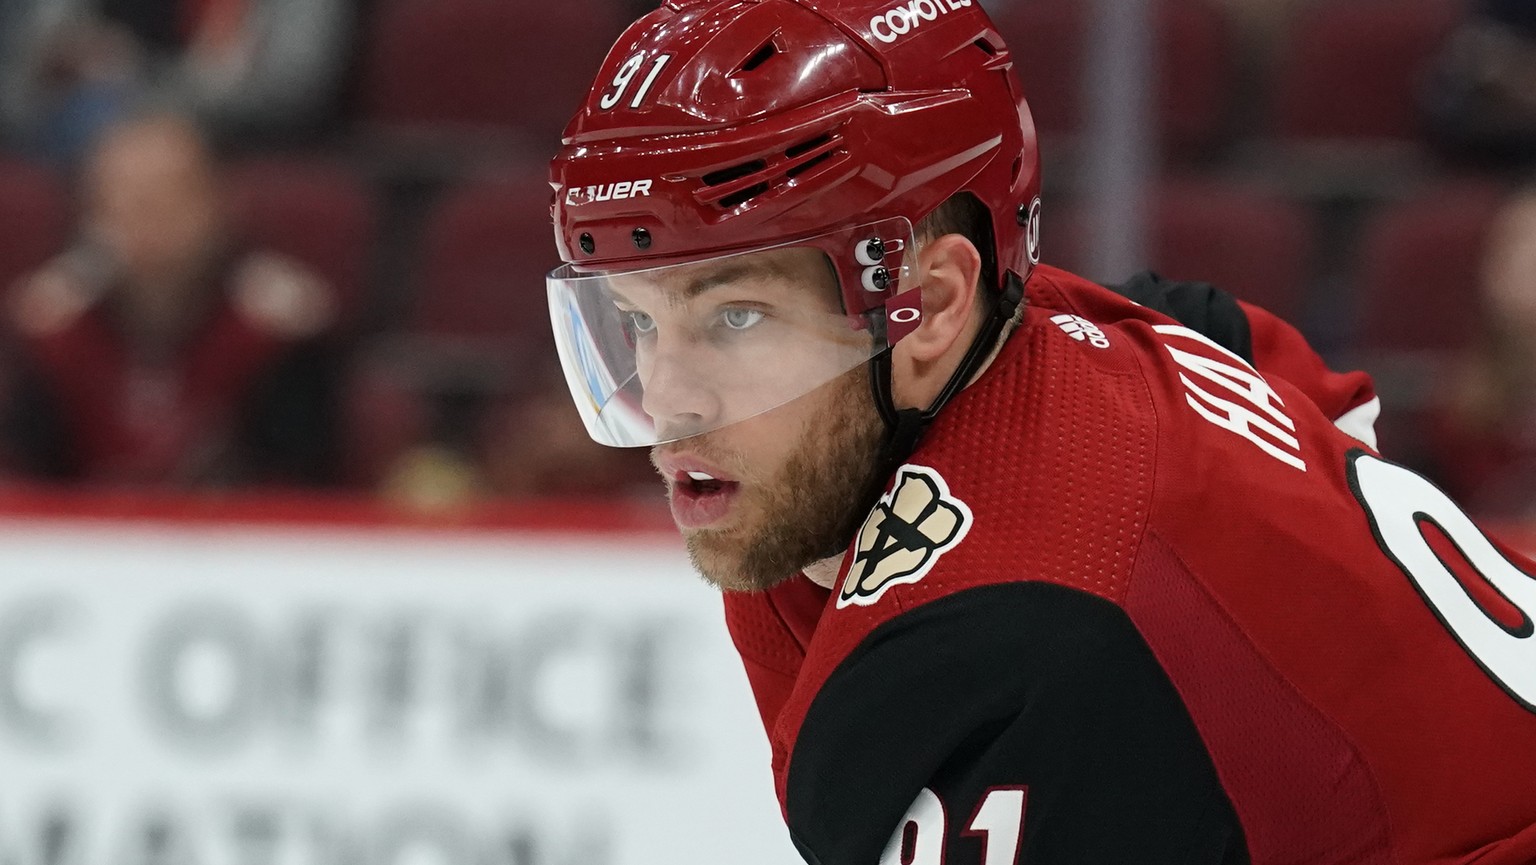 FILE - In this Feb. 17, 2020, file photo, then-Arizona Coyotes left wing Taylor Hall (91) is shown during the first period of an NHL hockey game against the New York Islanders, in Glendale, Ariz. Buff ...